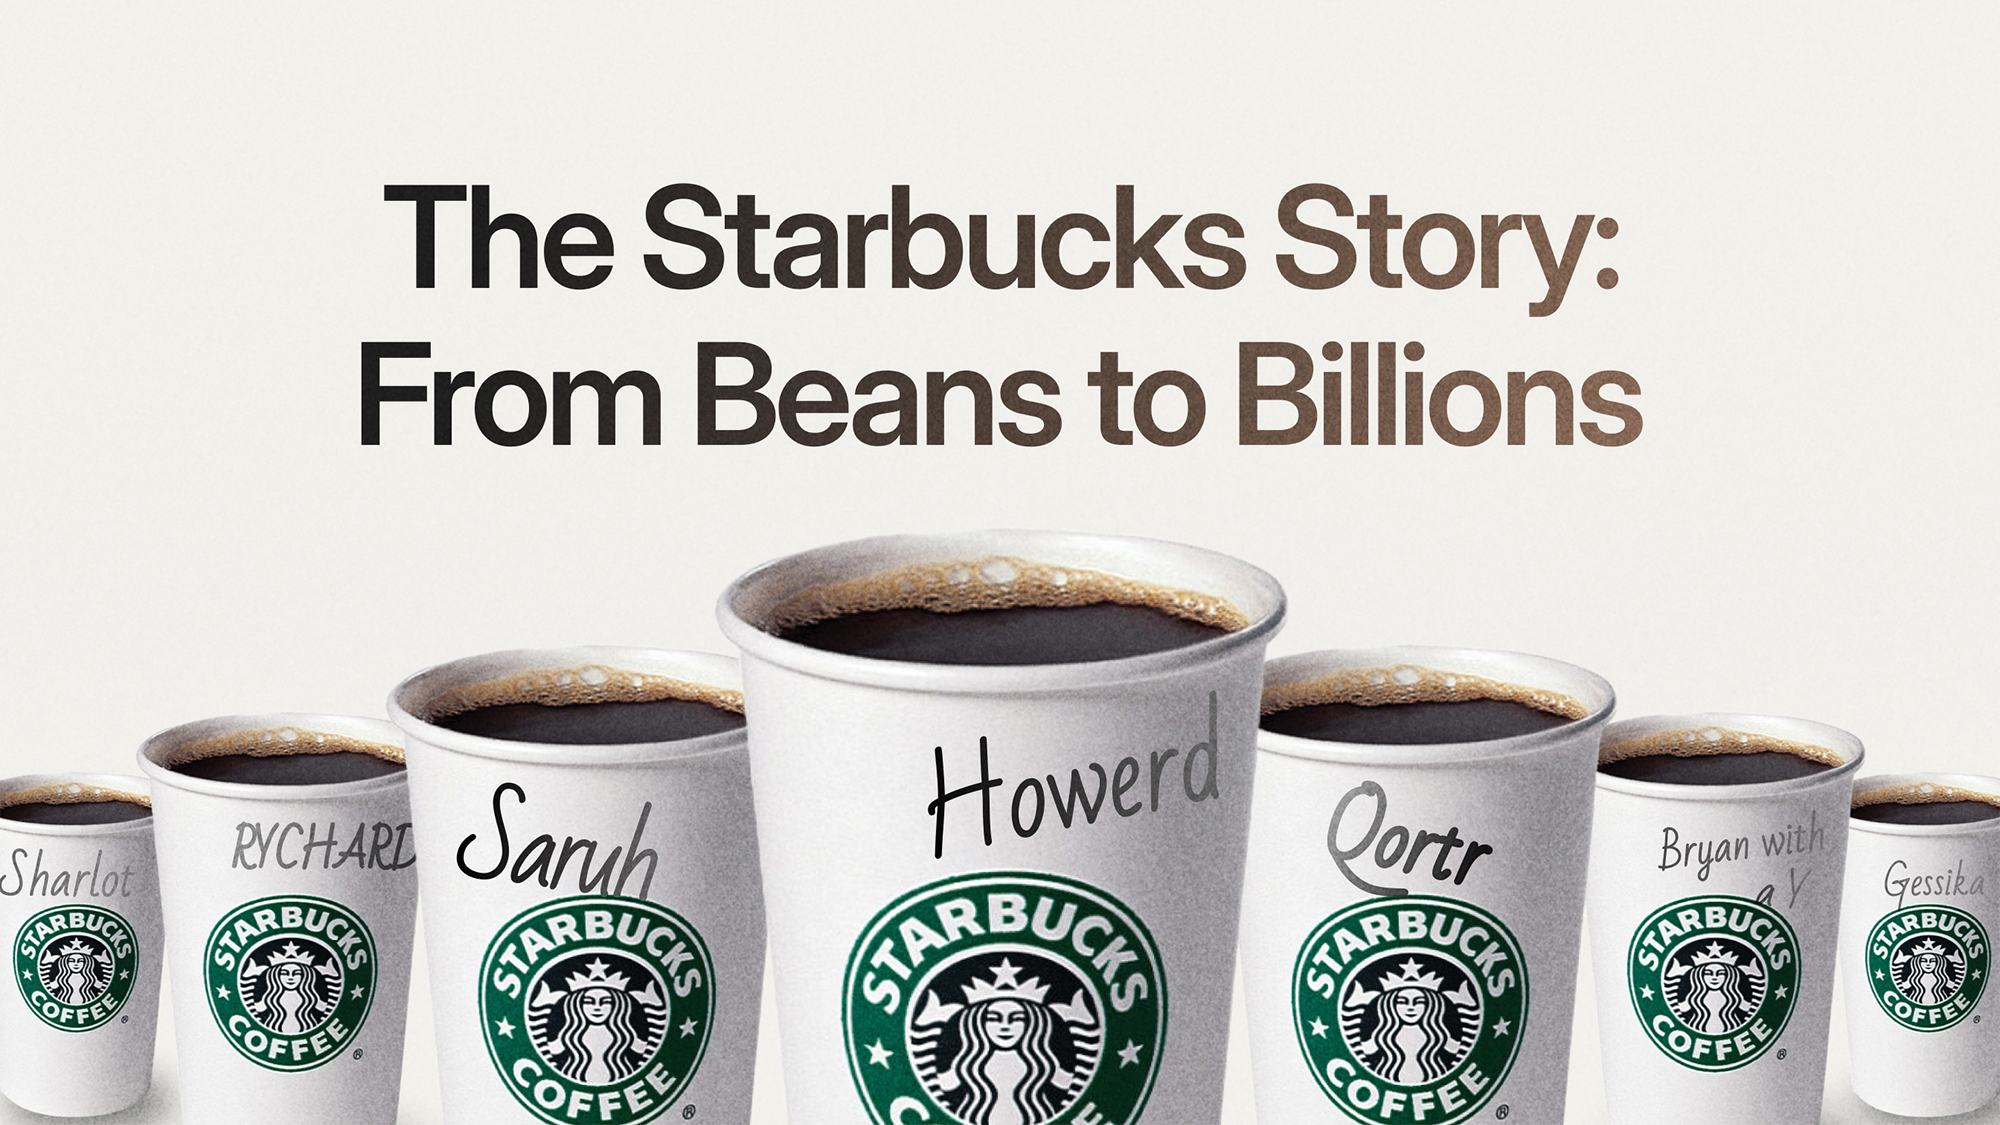 The Starbucks Story: From Beans to Billions